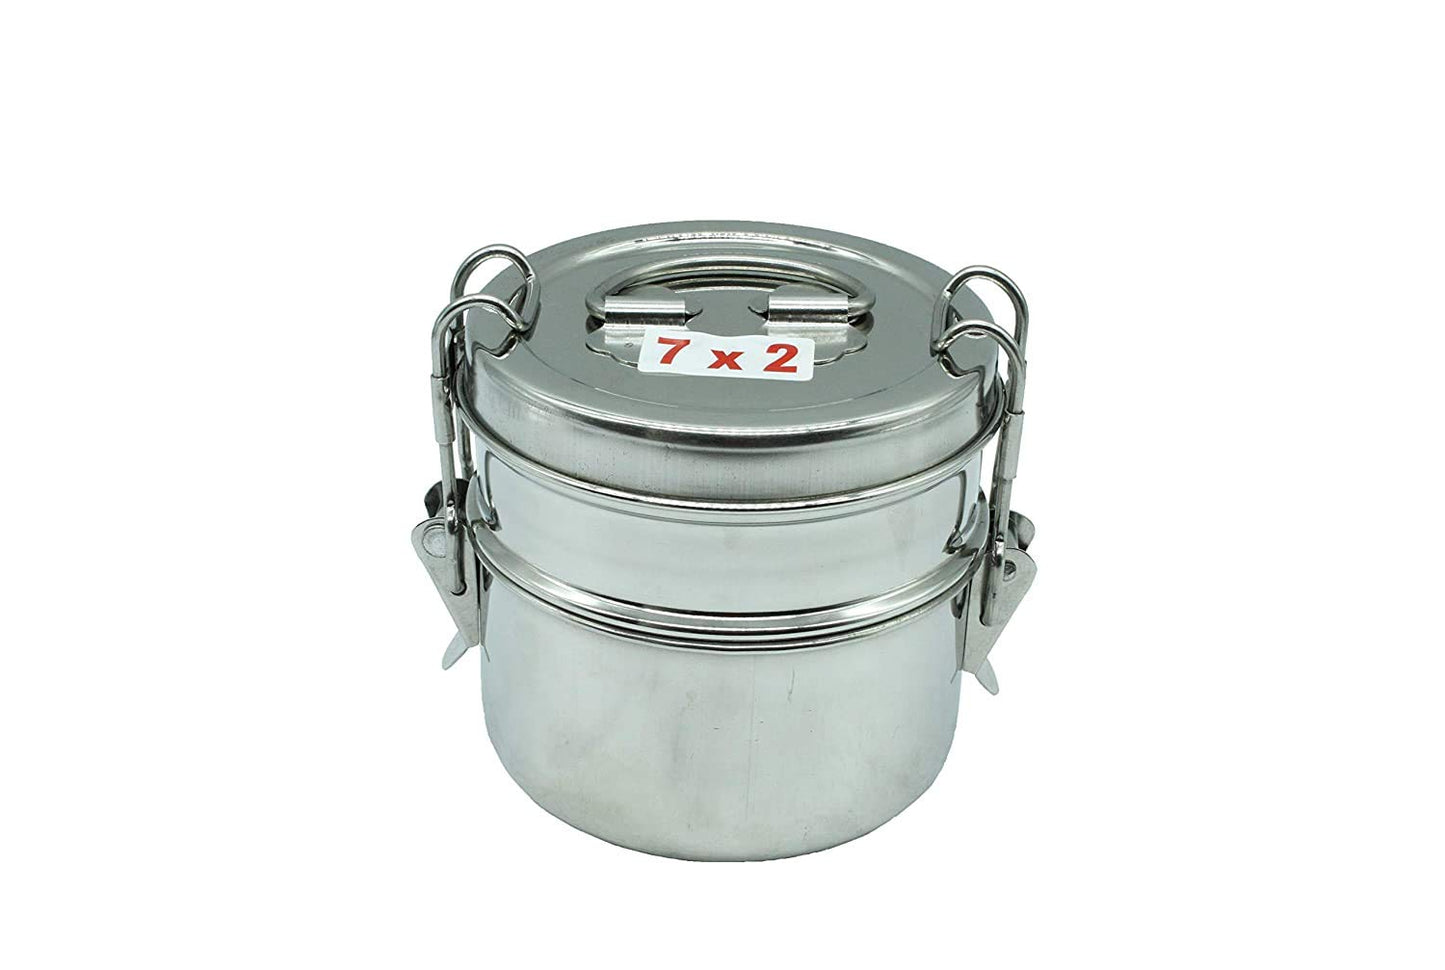 Stainless Steel 2 Tier Lunch Box | Tiffin Box (Size: 7x2)